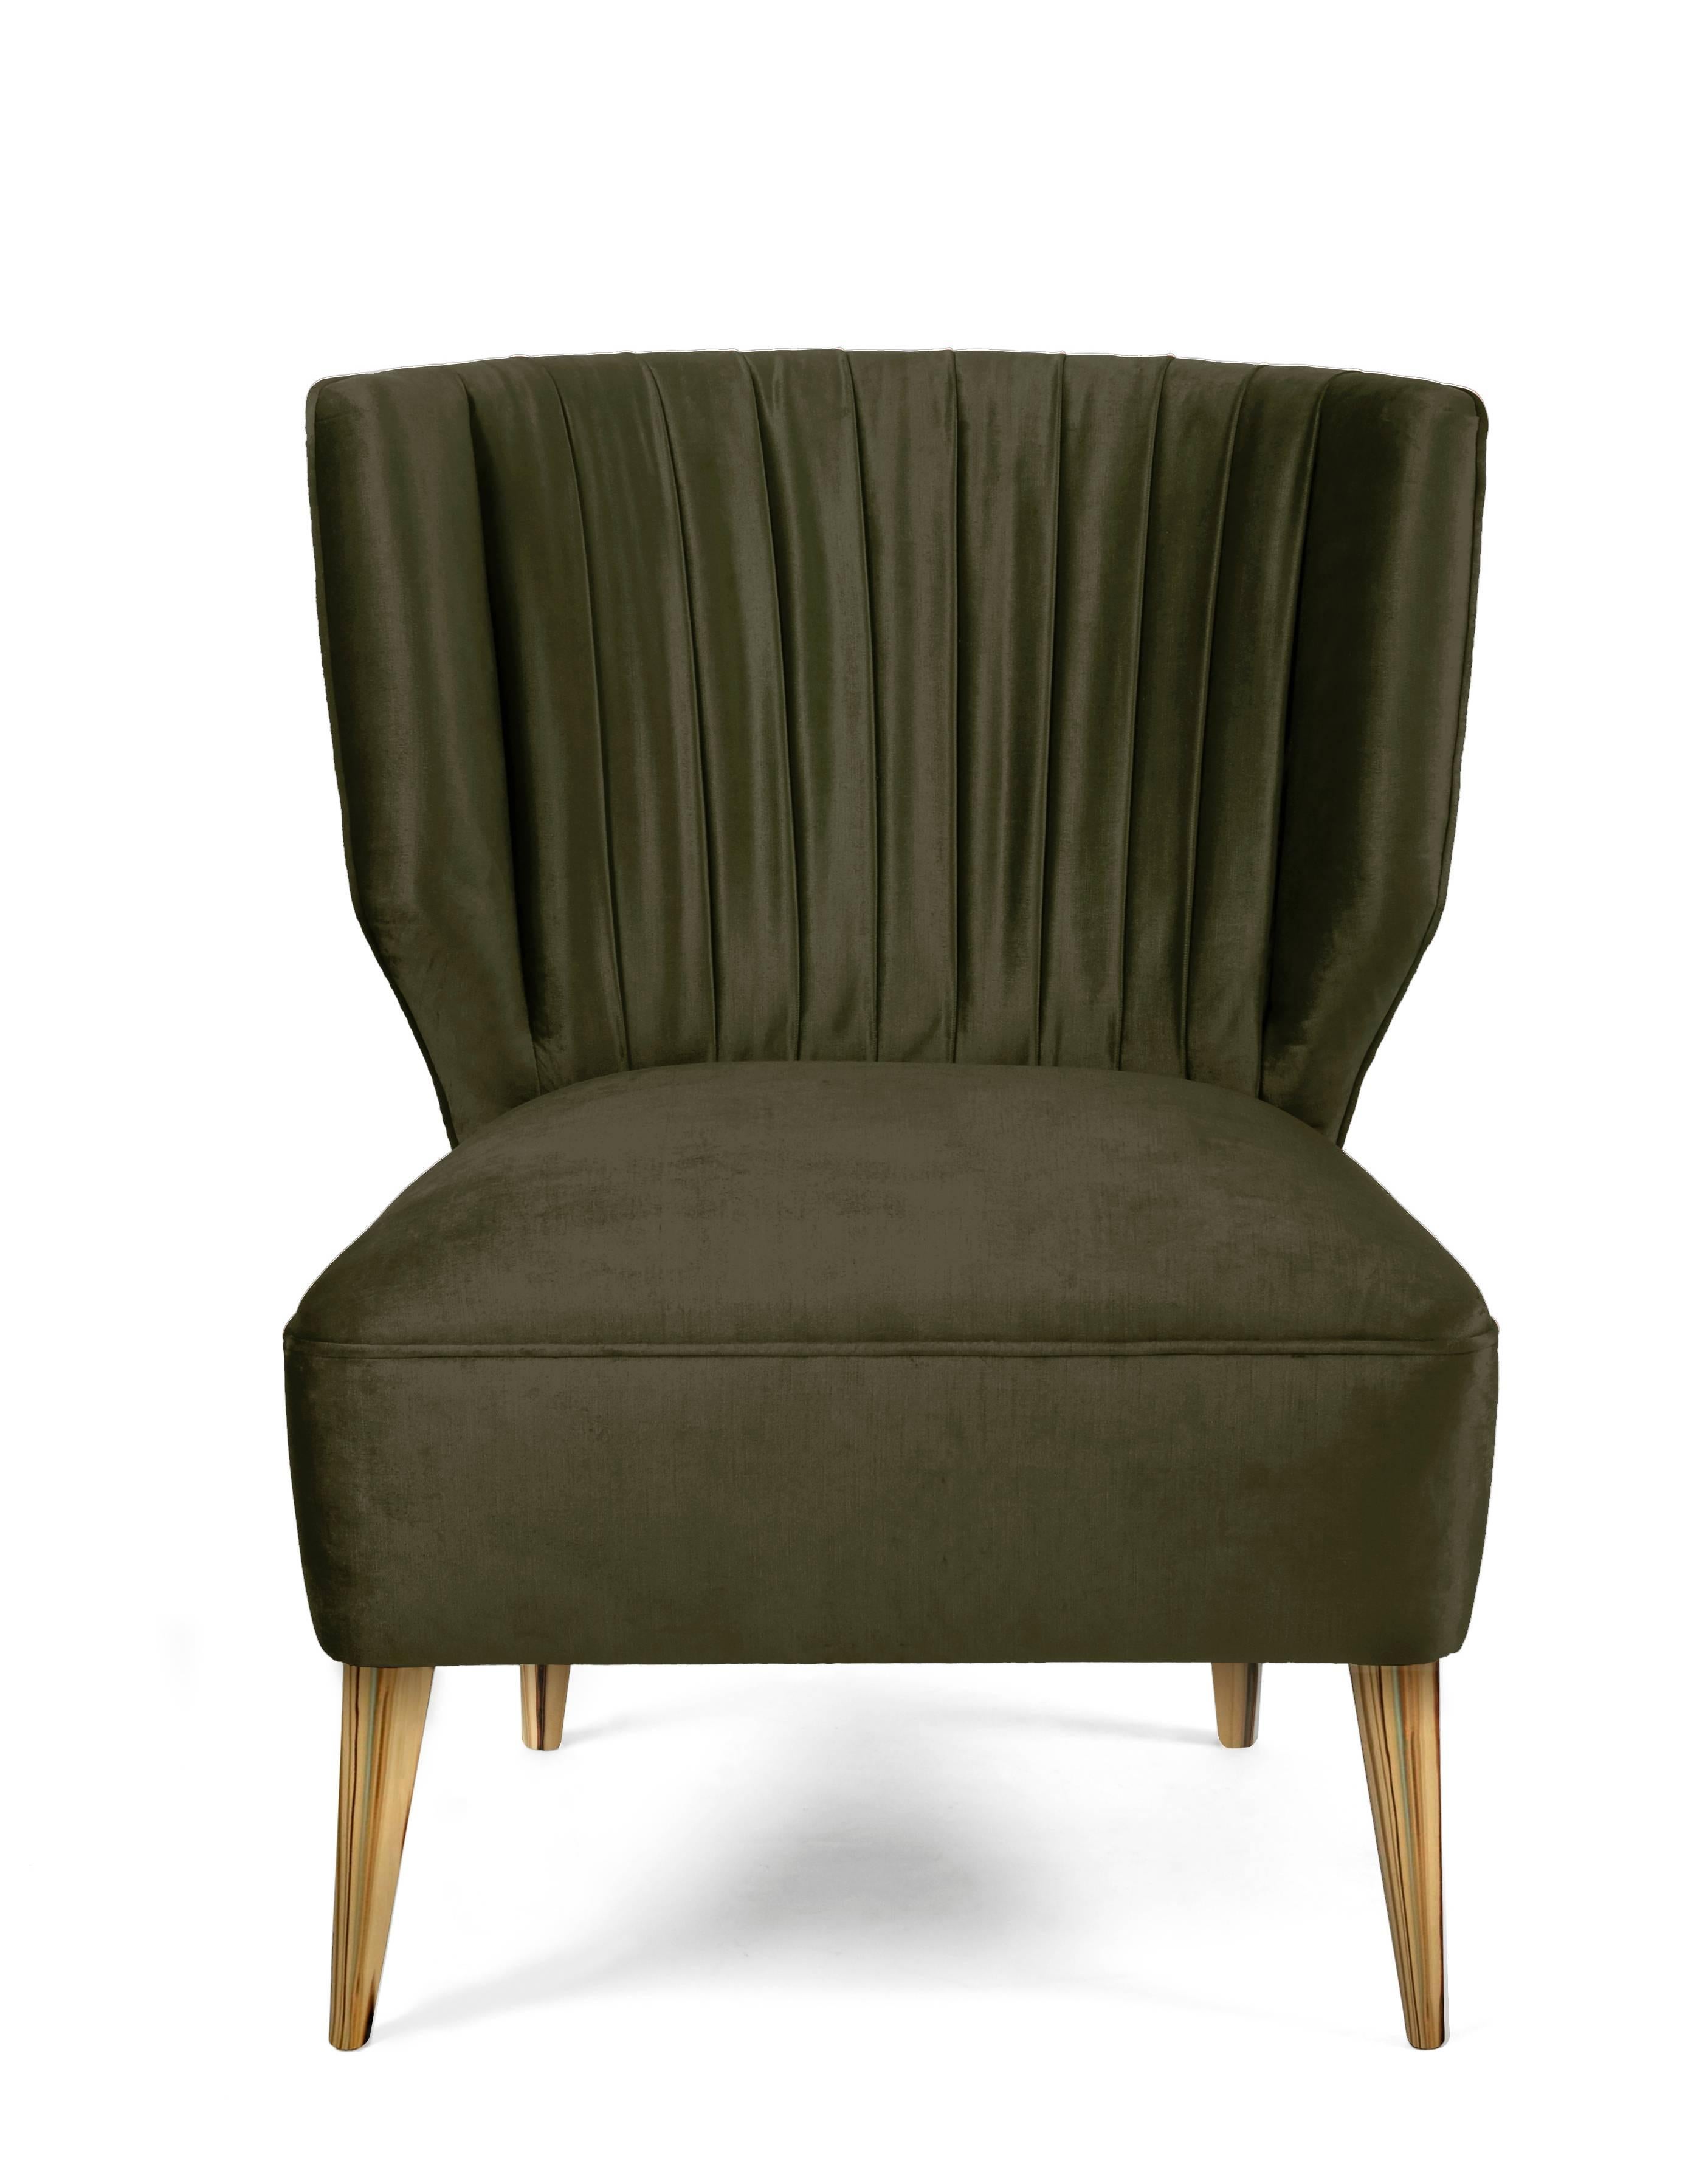 Olive green satin velvet upholstered armchair with golden polished nails and glossy varnished golden leaf legs. This armchair was inspired by the Bakairi tribe. The legend says that it was created by the twin gods Keri and Kame. Together they